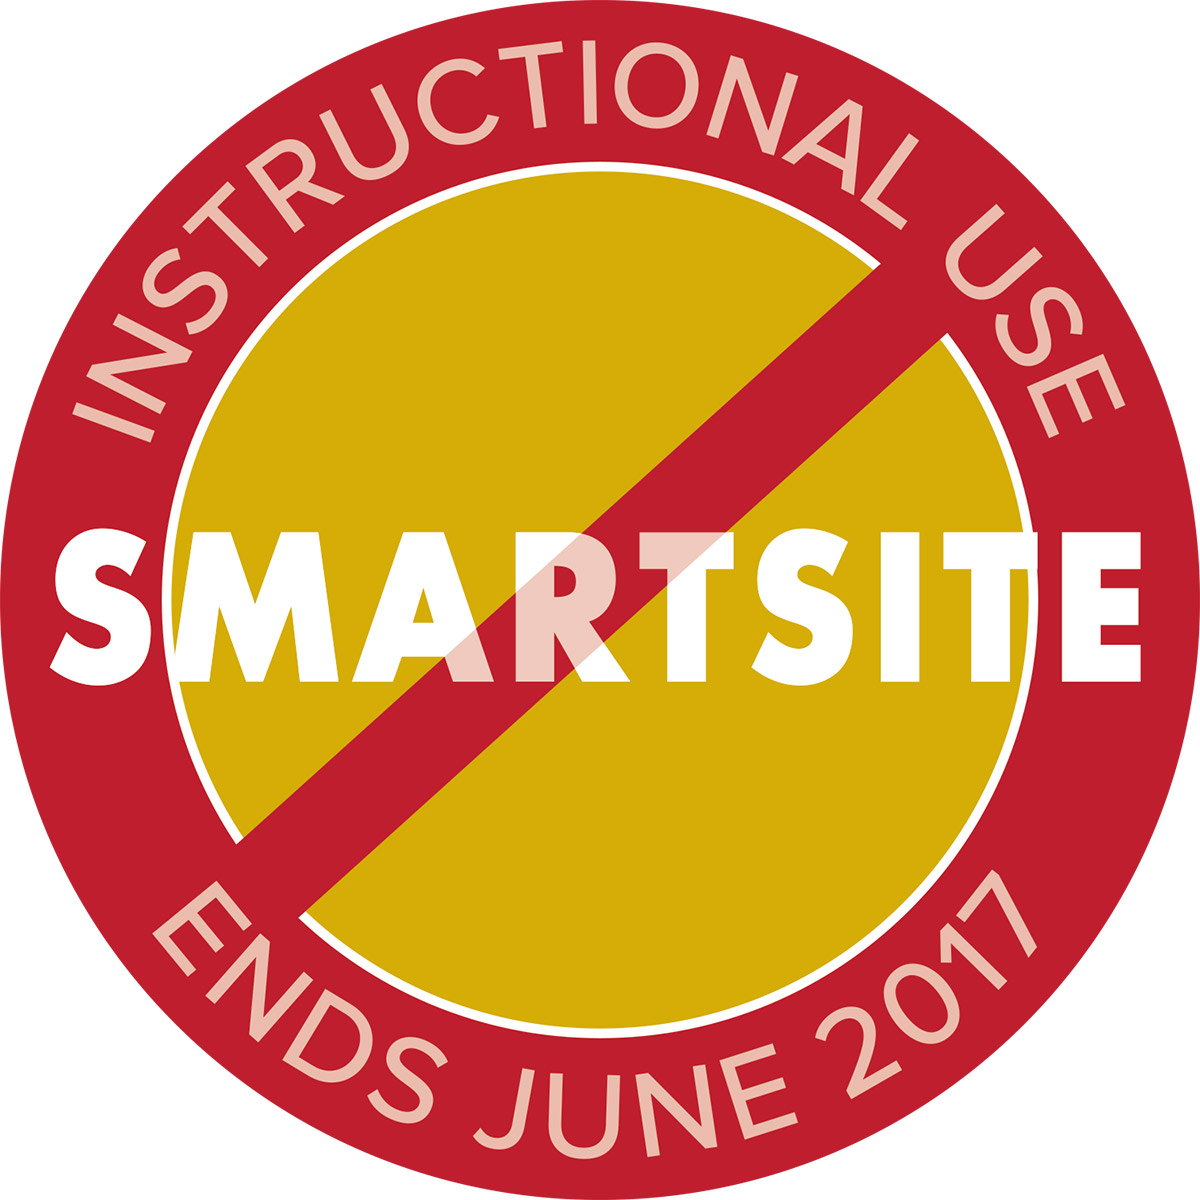 No more instructional use of SmartSite after June 2017.